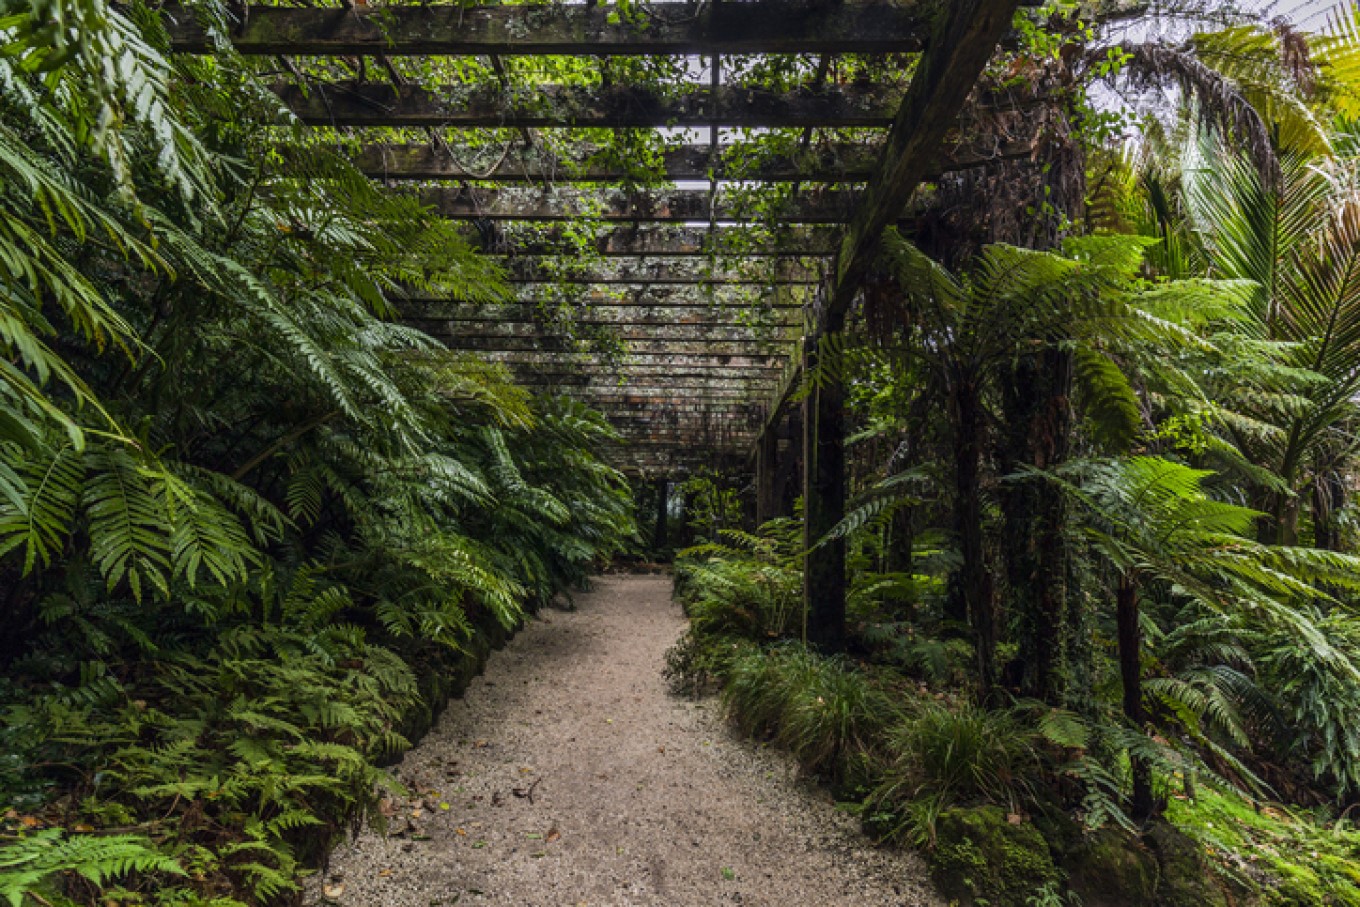 The coolest spots are where ferns grow. The fernery at Pukekawa Auckland Domain’s Wintergarden is built on the site of a former quarry.